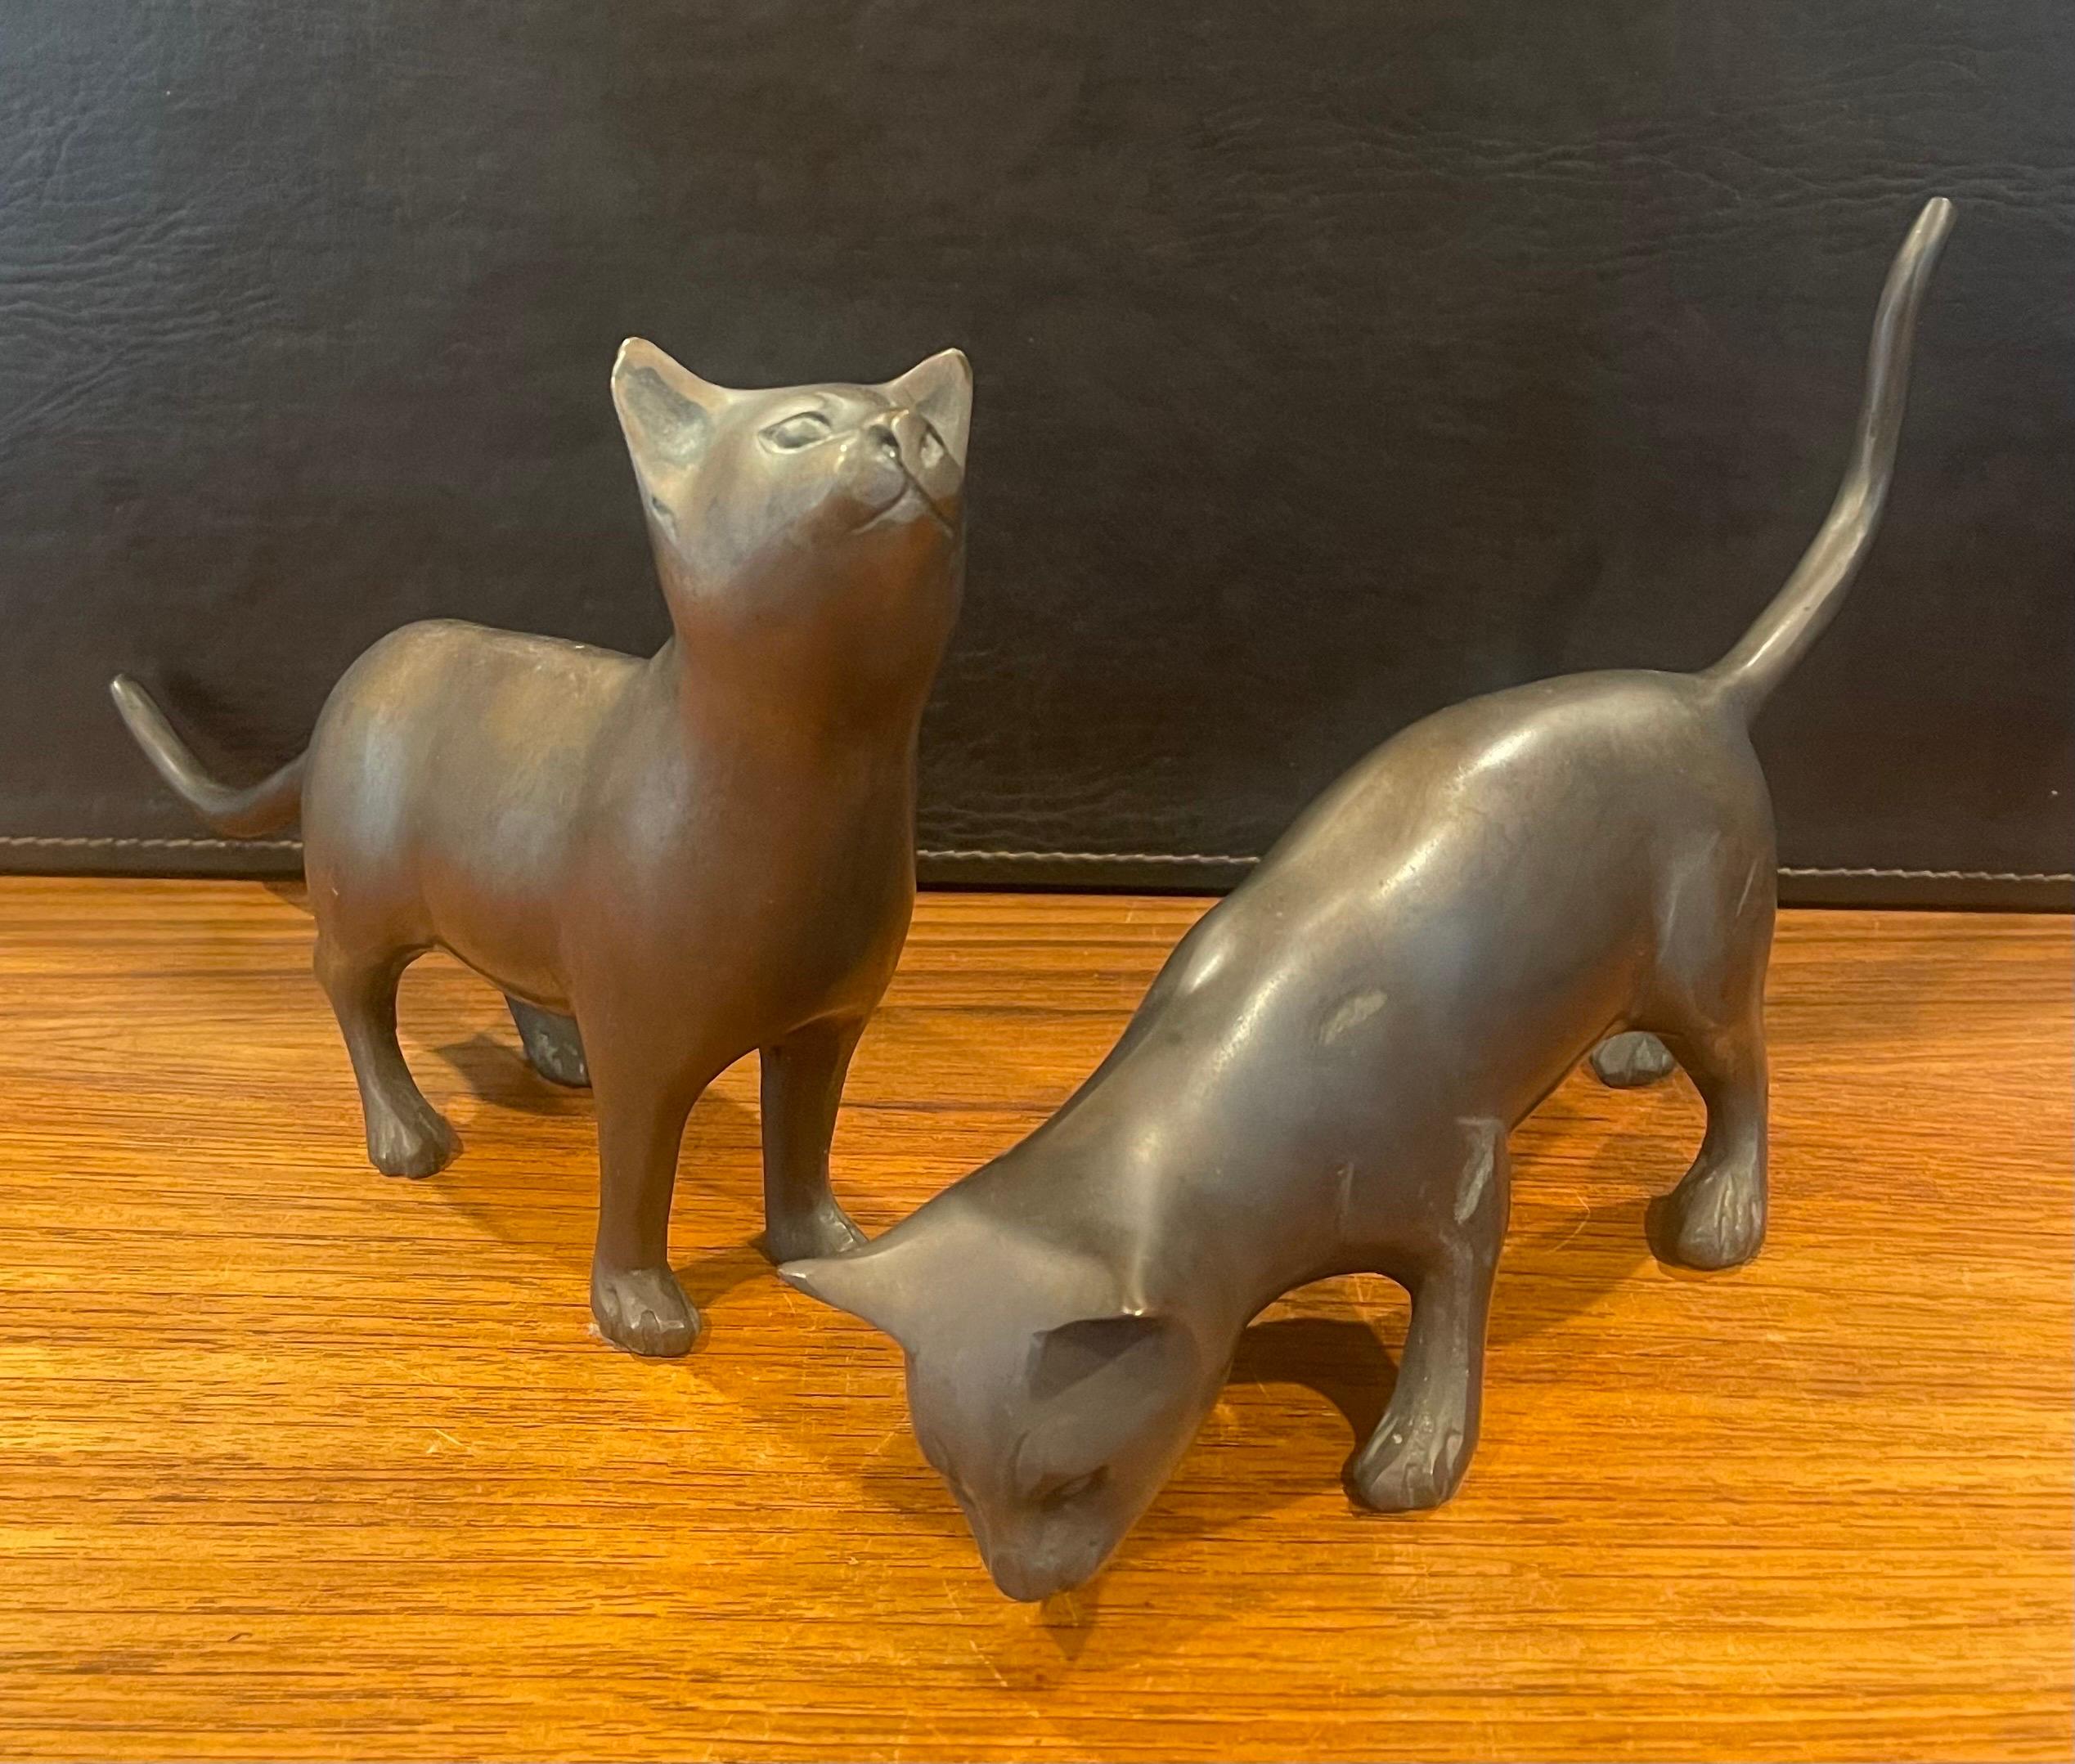 Cool pair of bronze cat sculptures circa 1970s. They are in original condition with a fine patina and a few small dings and some surface scratches; the pair measure 12